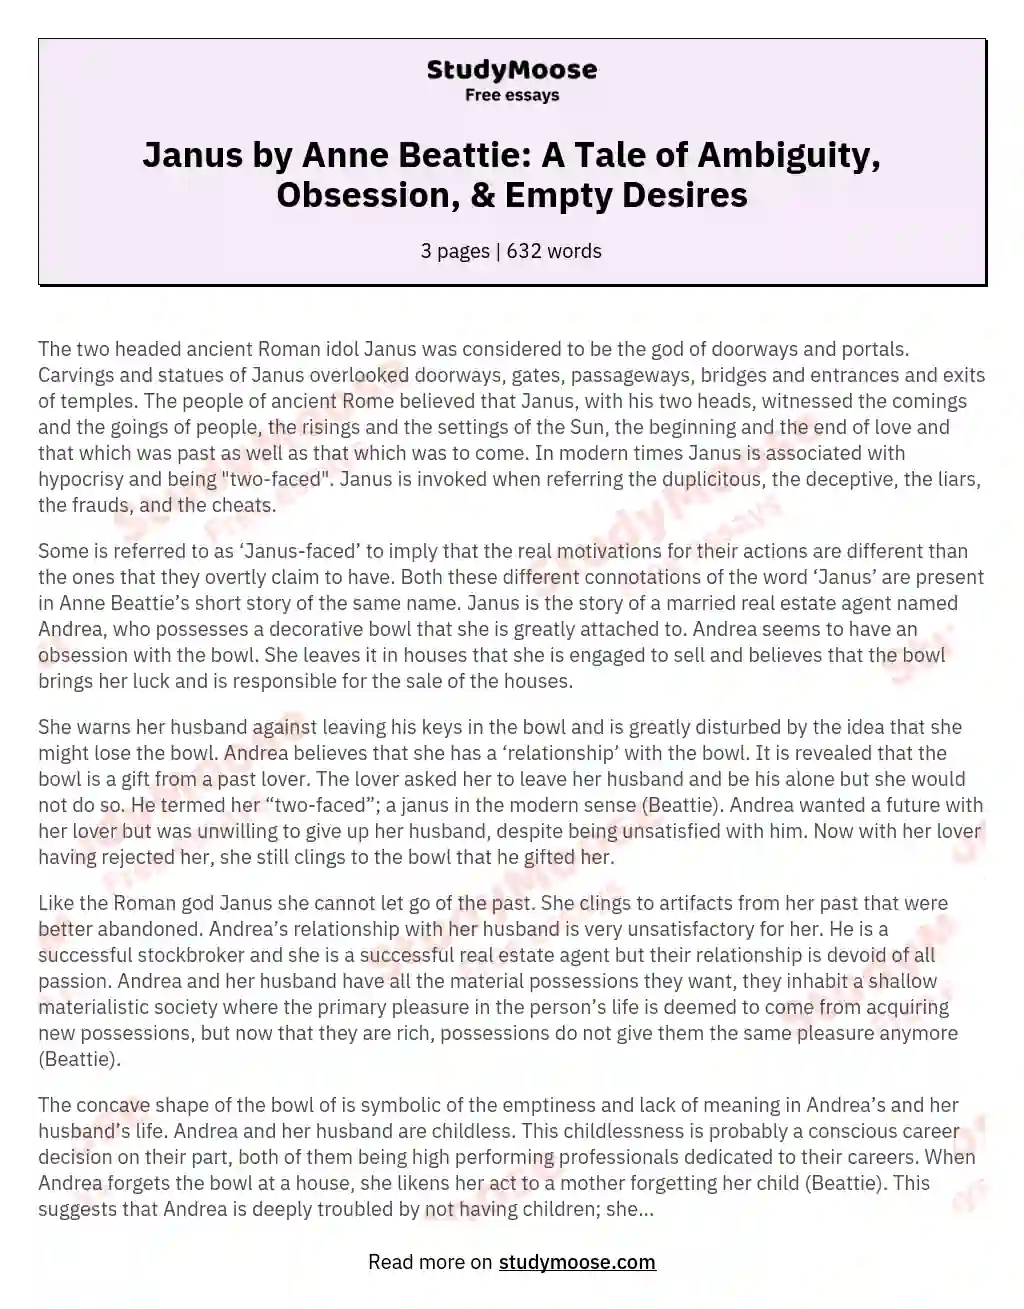 Janus by Anne Beattie: A Tale of Ambiguity, Obsession, & Empty Desires essay